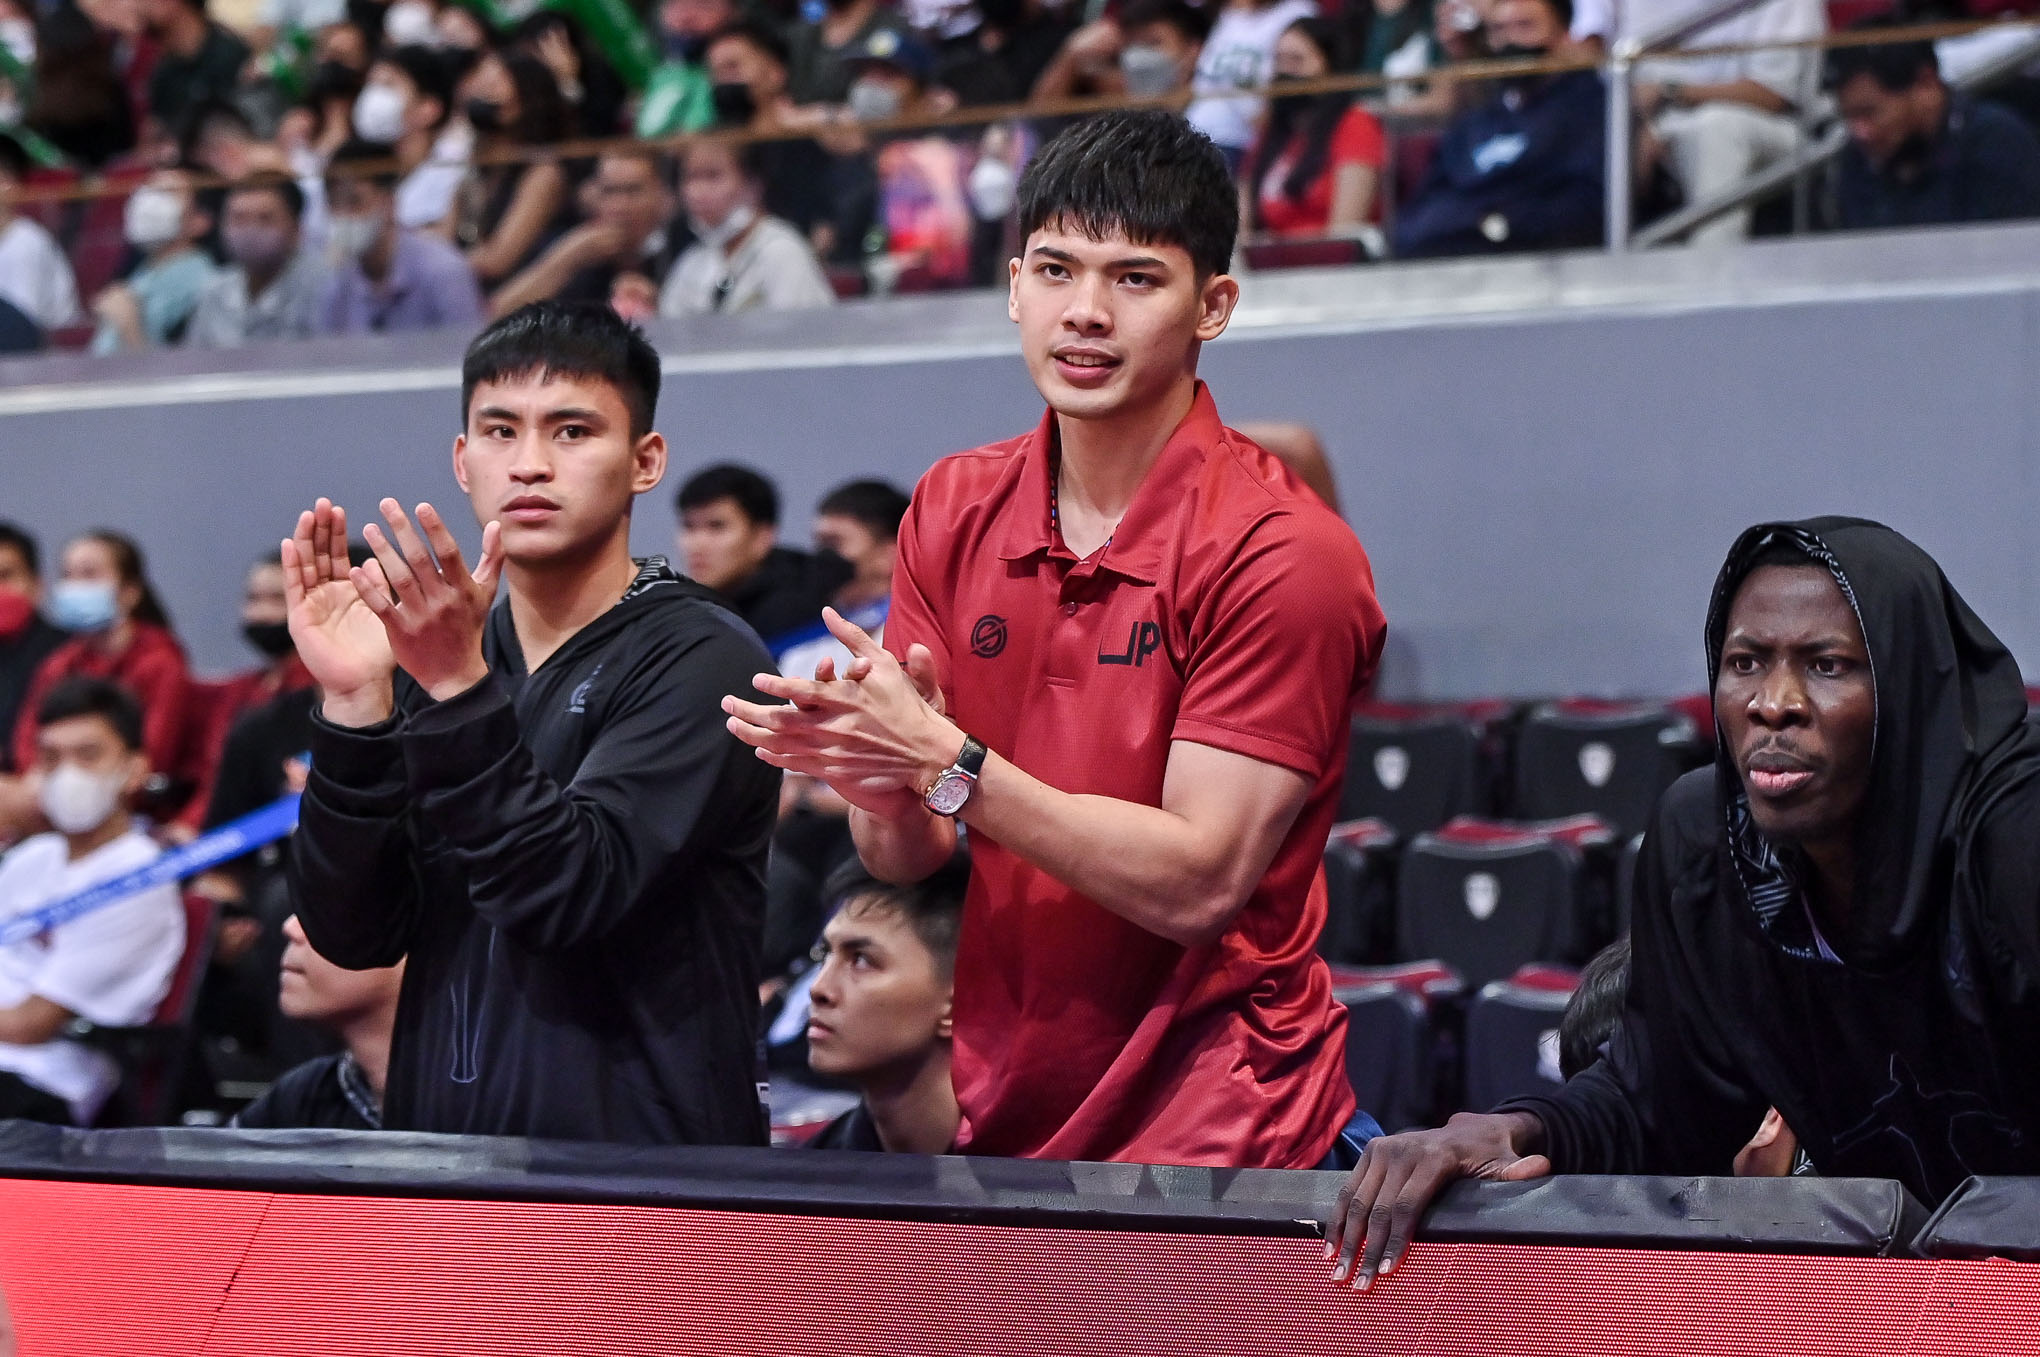 UAAP85-JD-Cagulangan-CJ-Cansino UP hopes Fortea sustains fine form once Cagulangan returns News UAAP UP  - philippine sports news